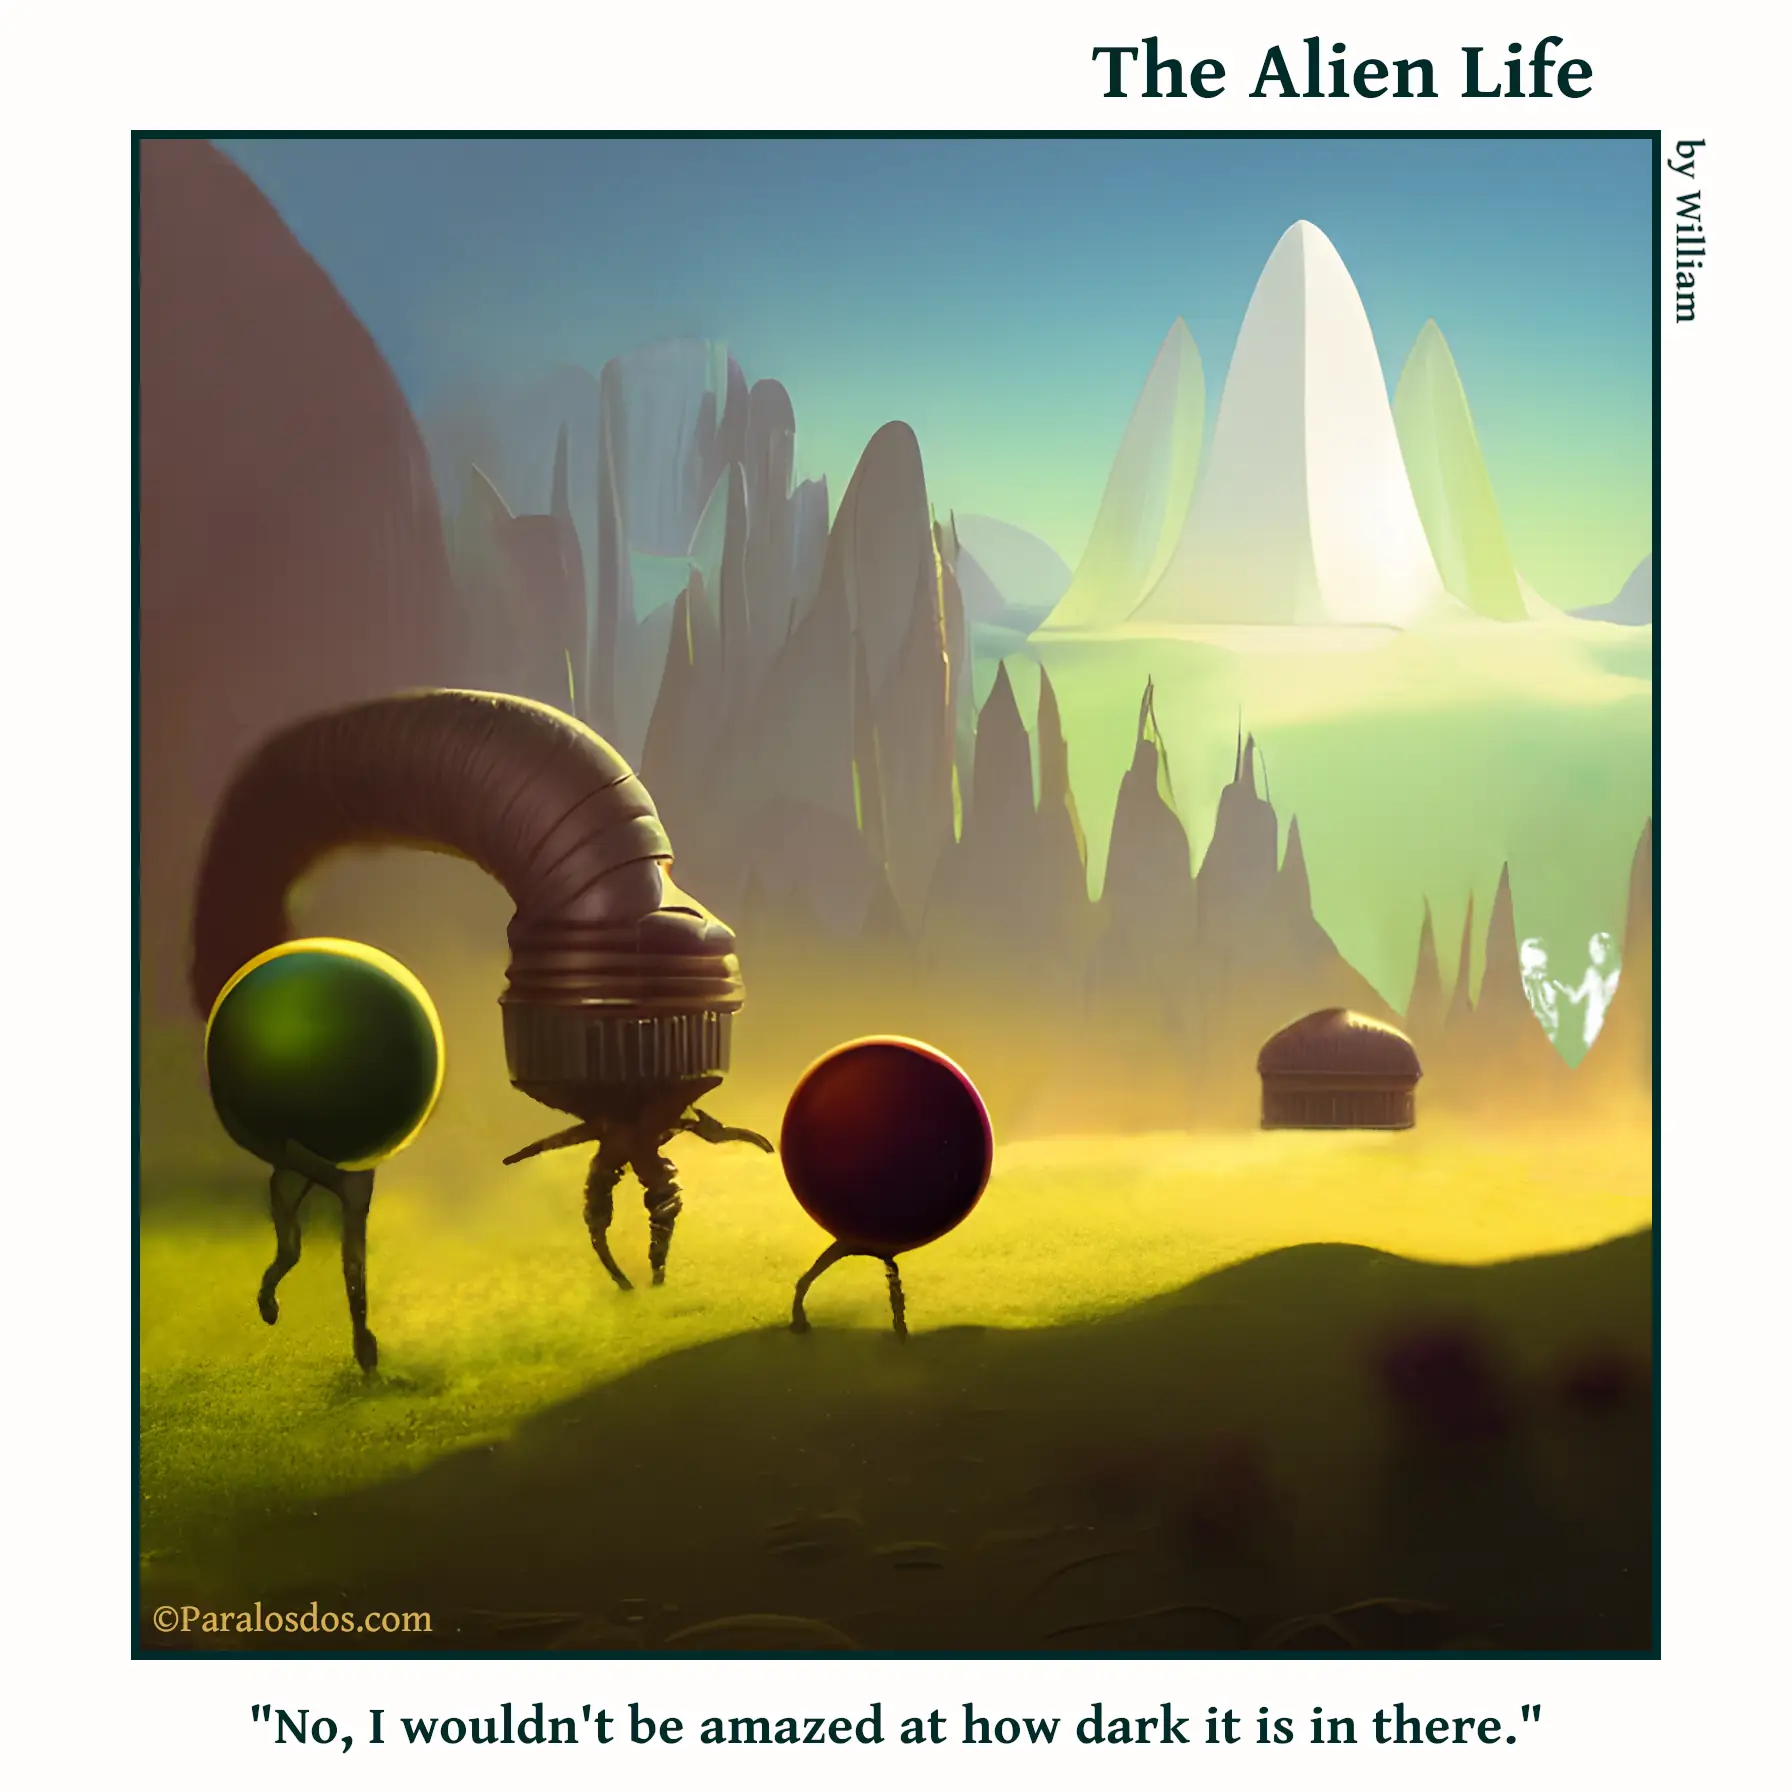 Three aliens are walking in a valley. One of them has his head stuck in some kind of thing that looks like a tap. The caption reads: "No, I wouldn't be amazed at how dark it is in there."